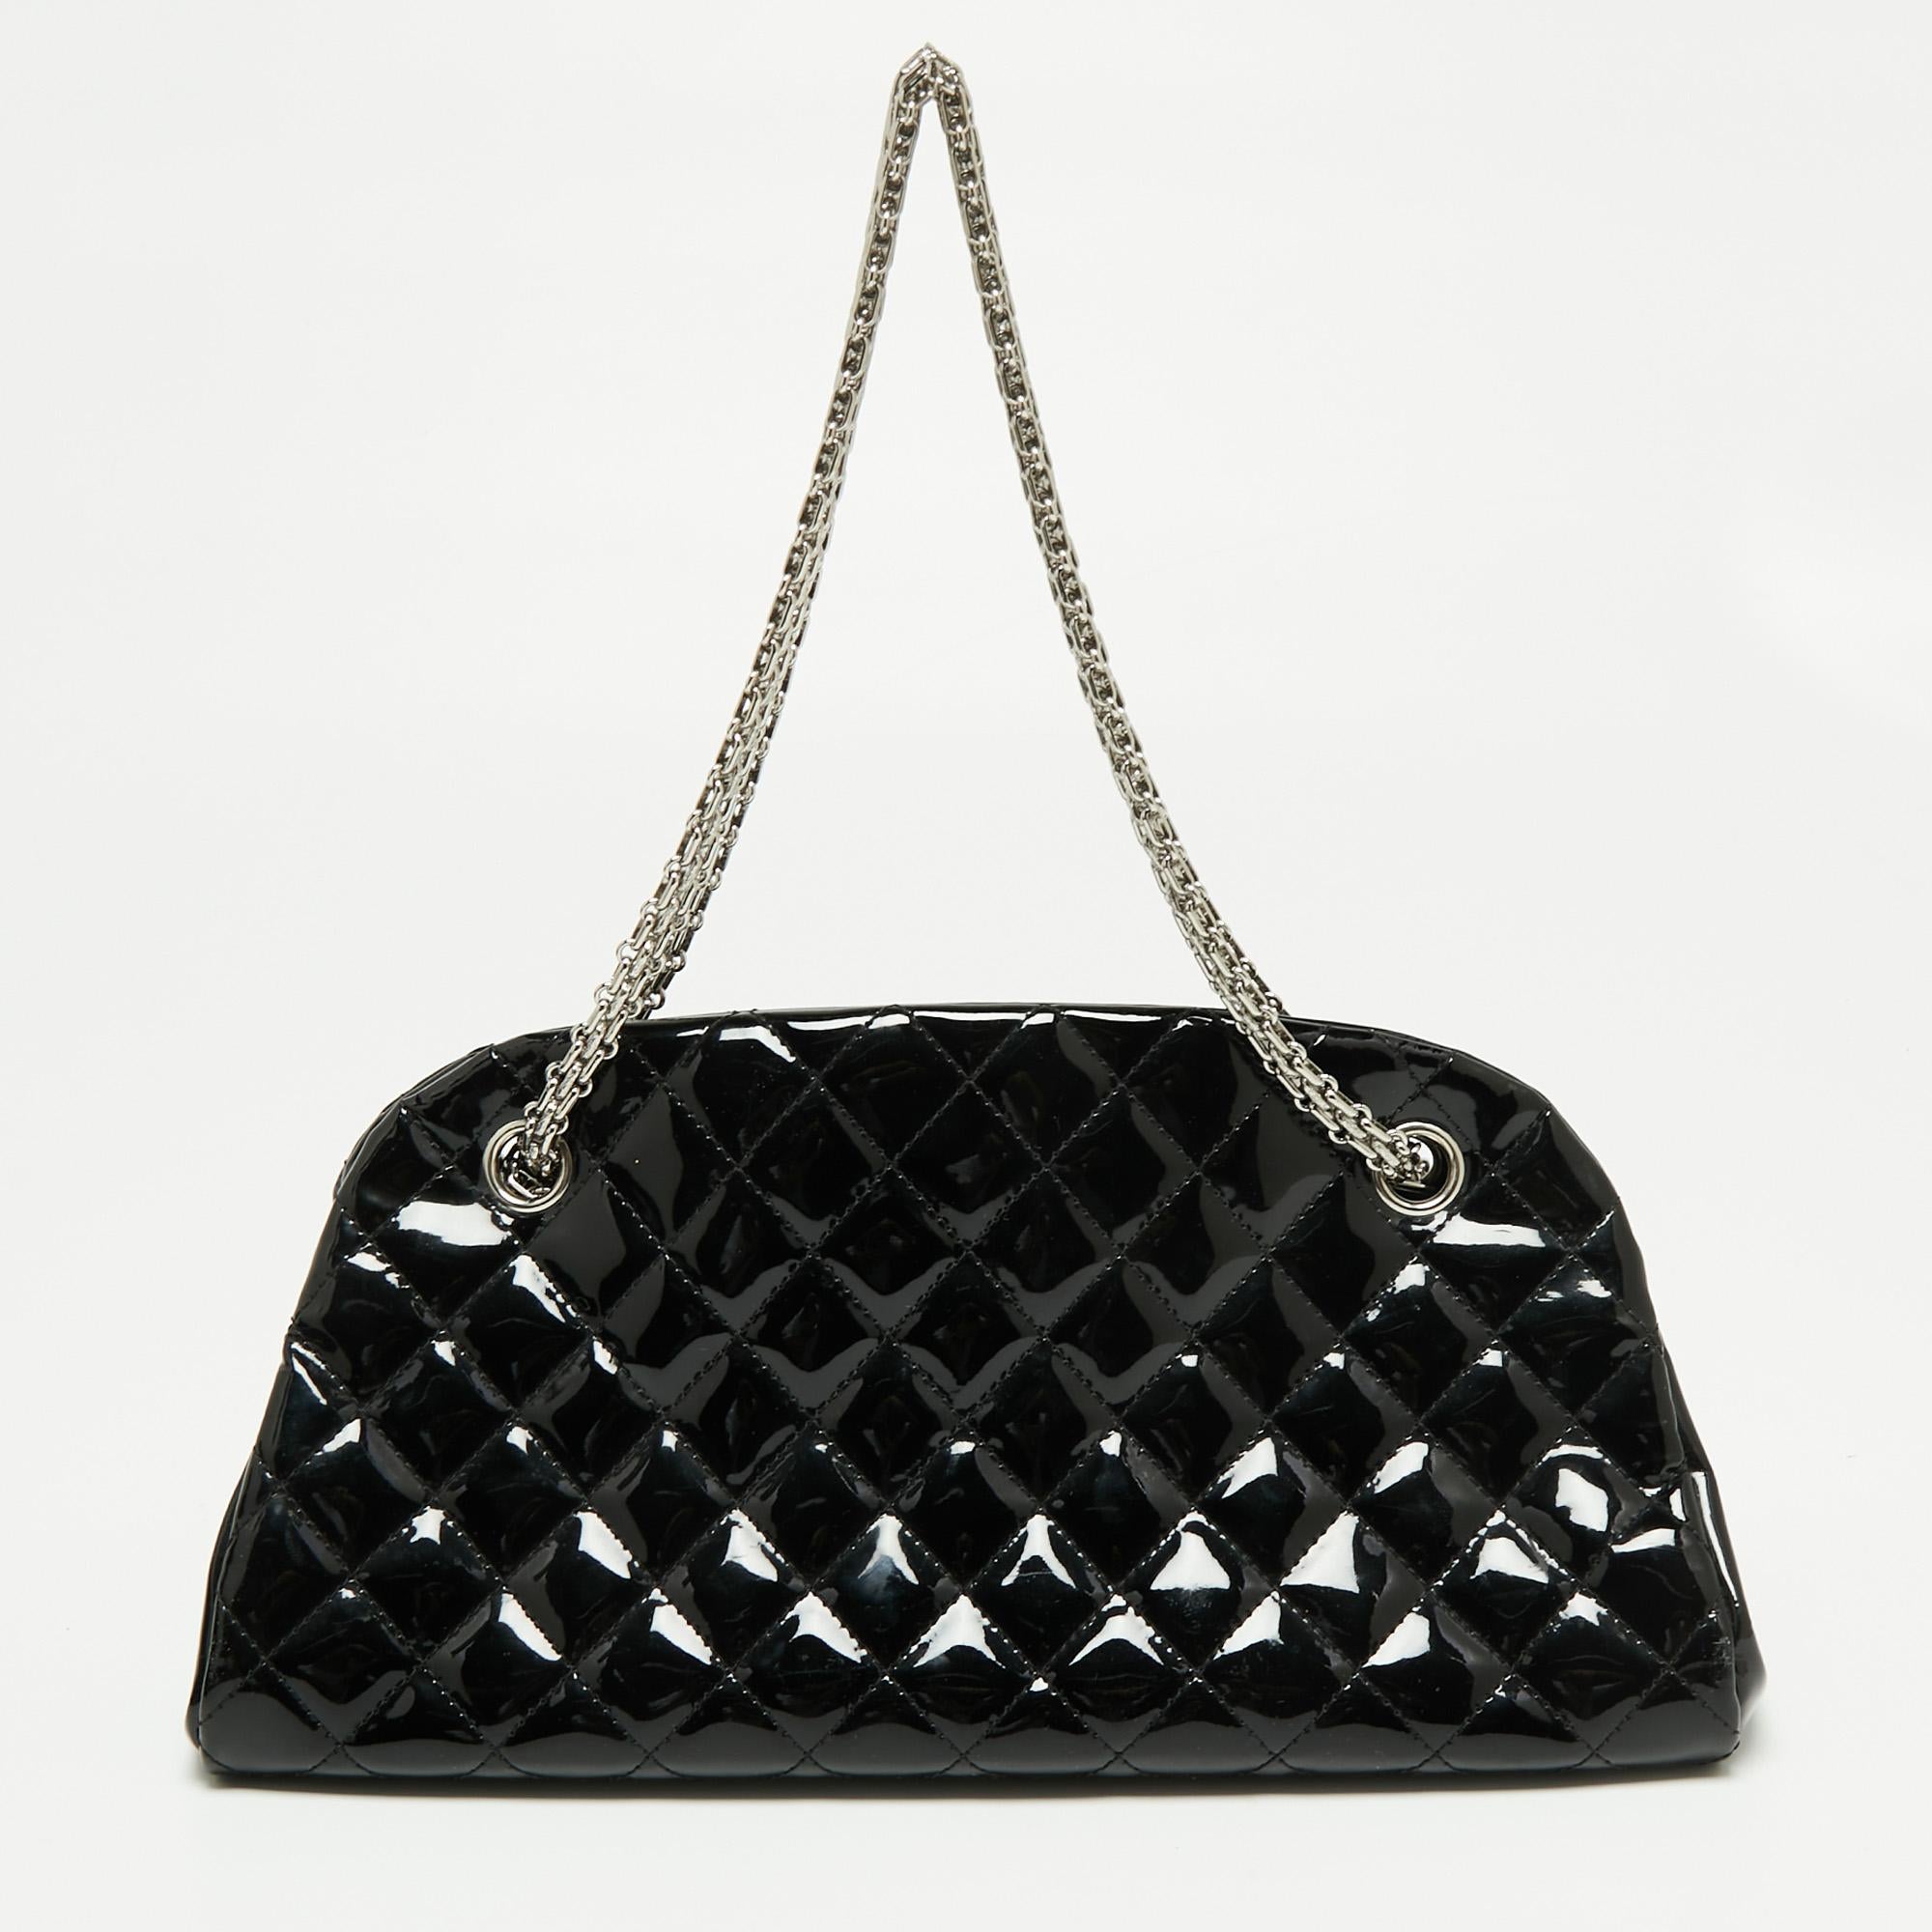 The Just Mademoiselle is another loved bag from Chanel. Crafted from patent leather, this beauty in black is lined with canvas and held by chain handles. This bag has well-sized compartments for your necessities and a CC charm for you to